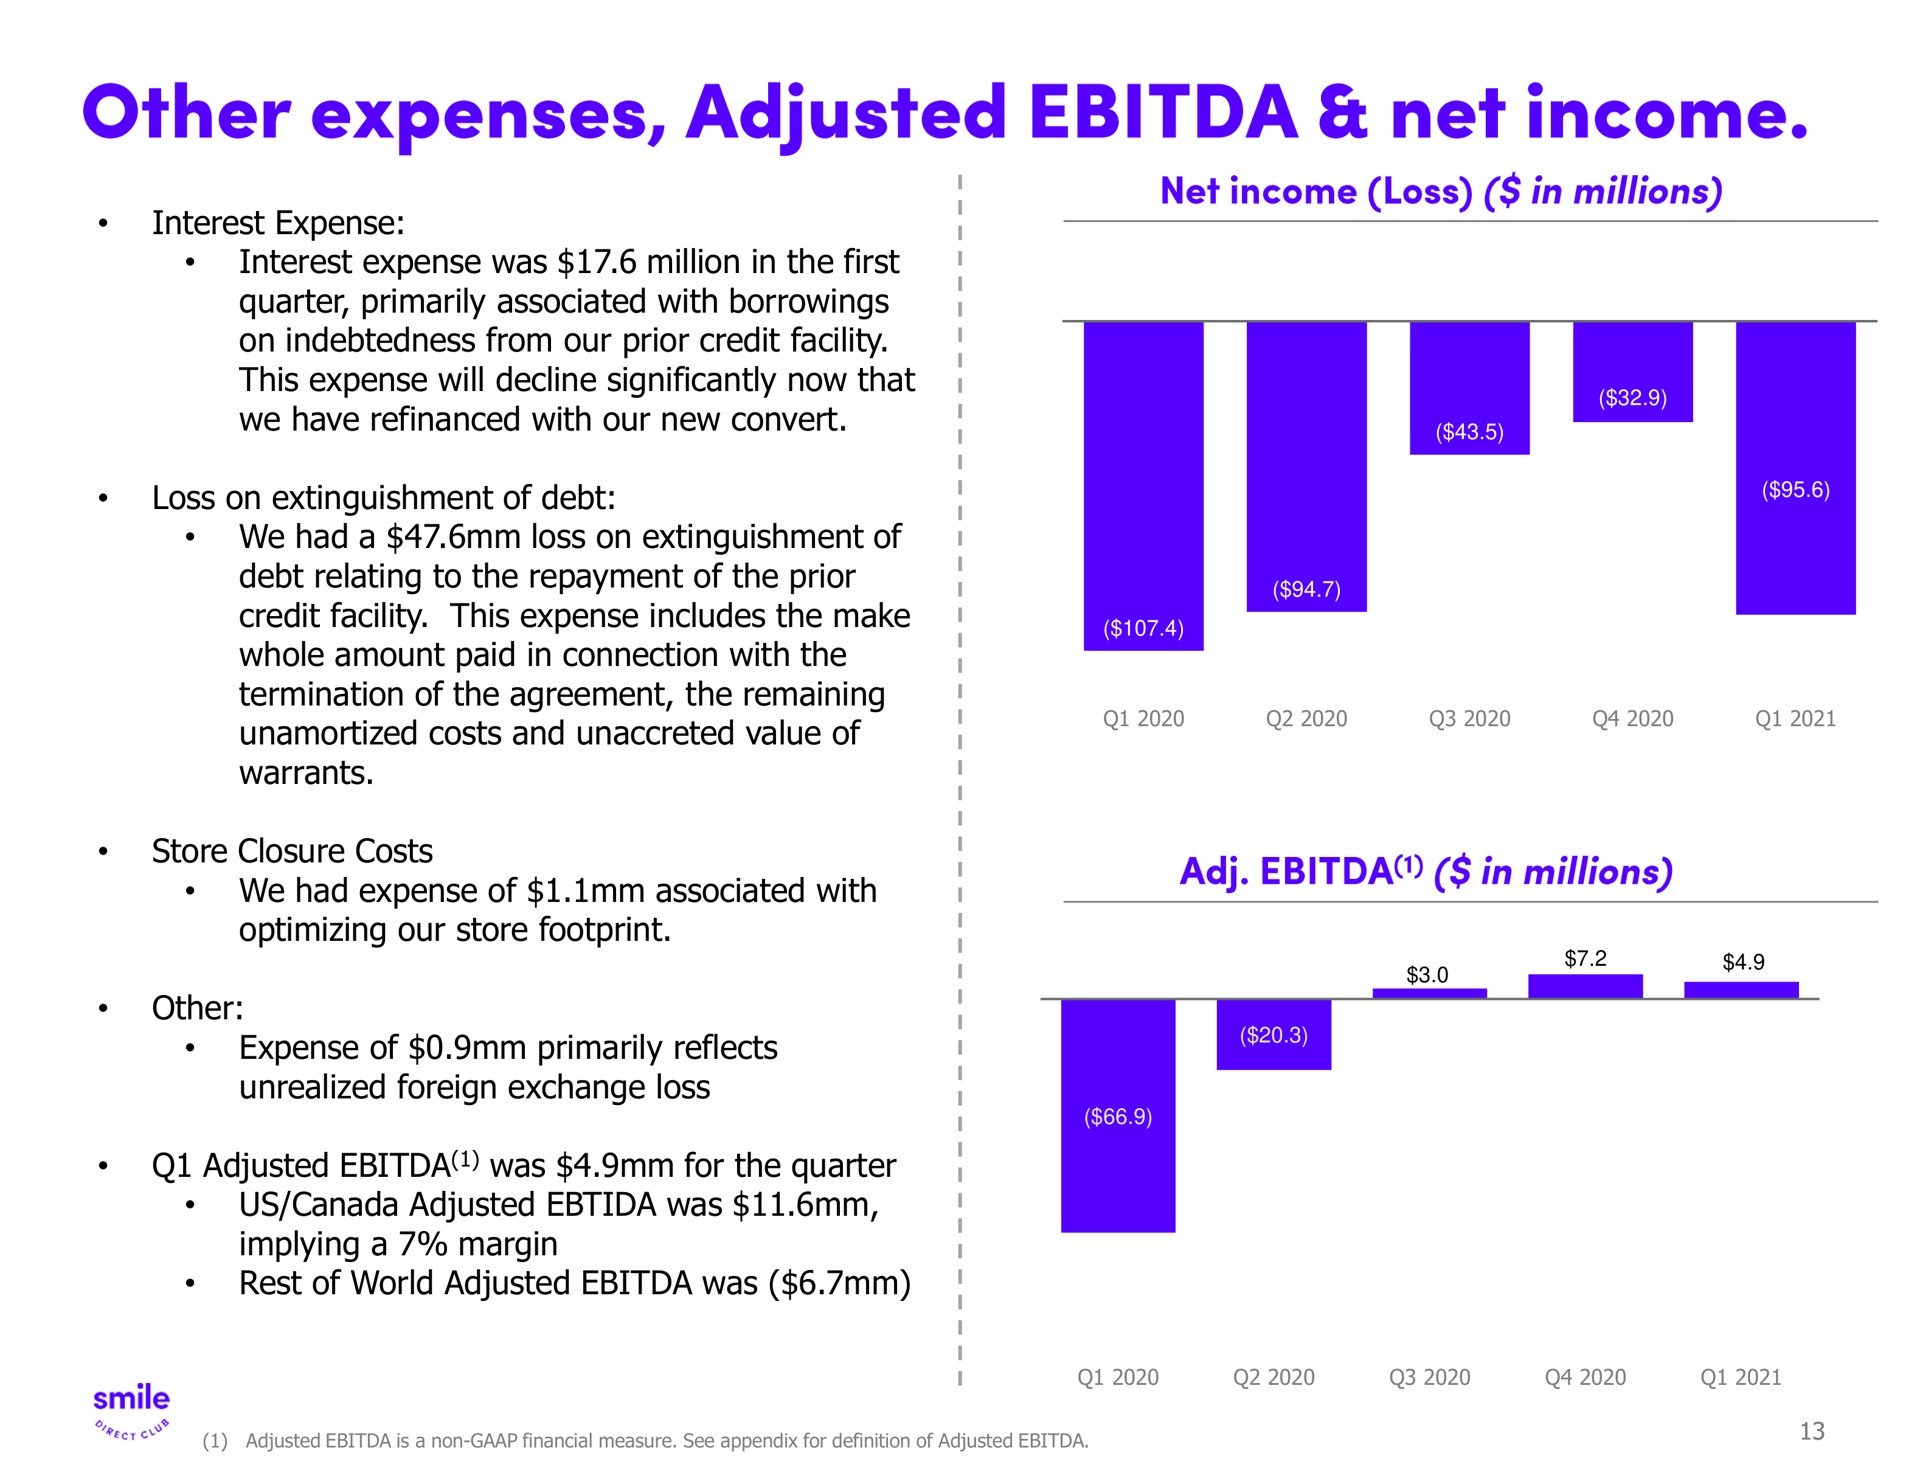 other expenses adjusted net income | SmileDirectClub